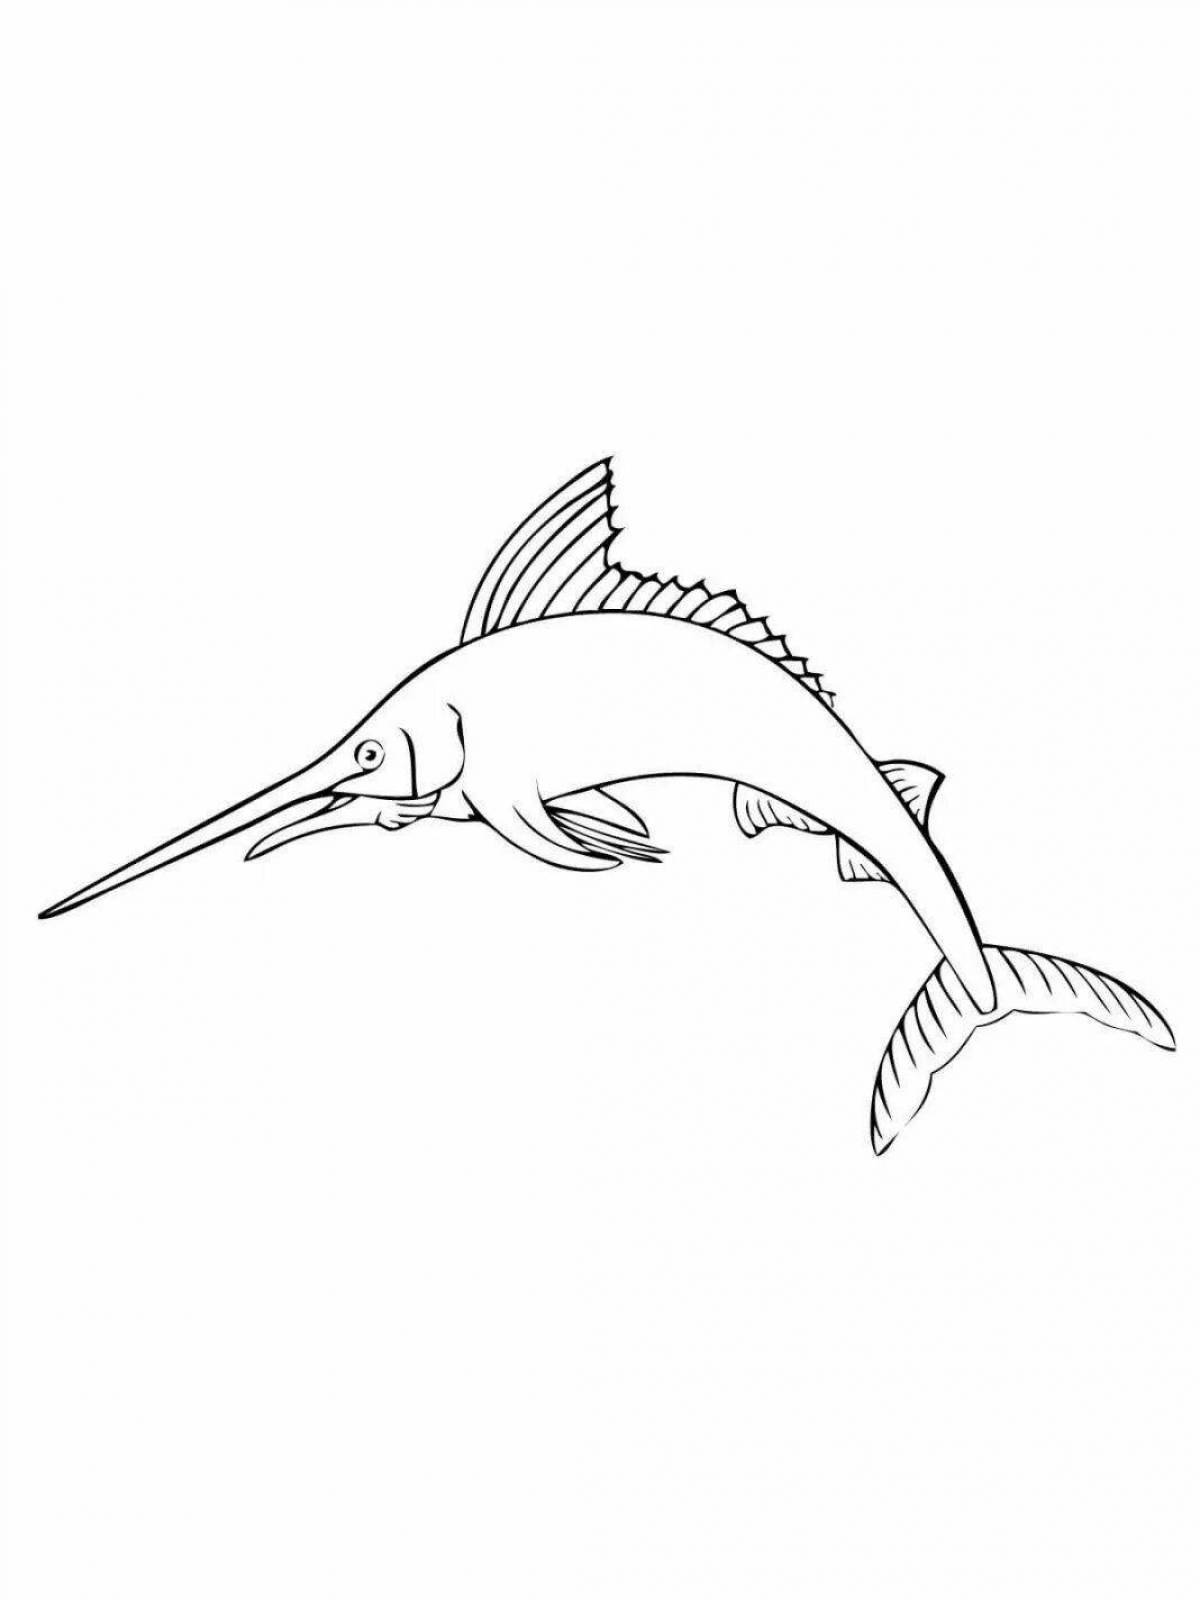 Amazing fish sword coloring page for kids